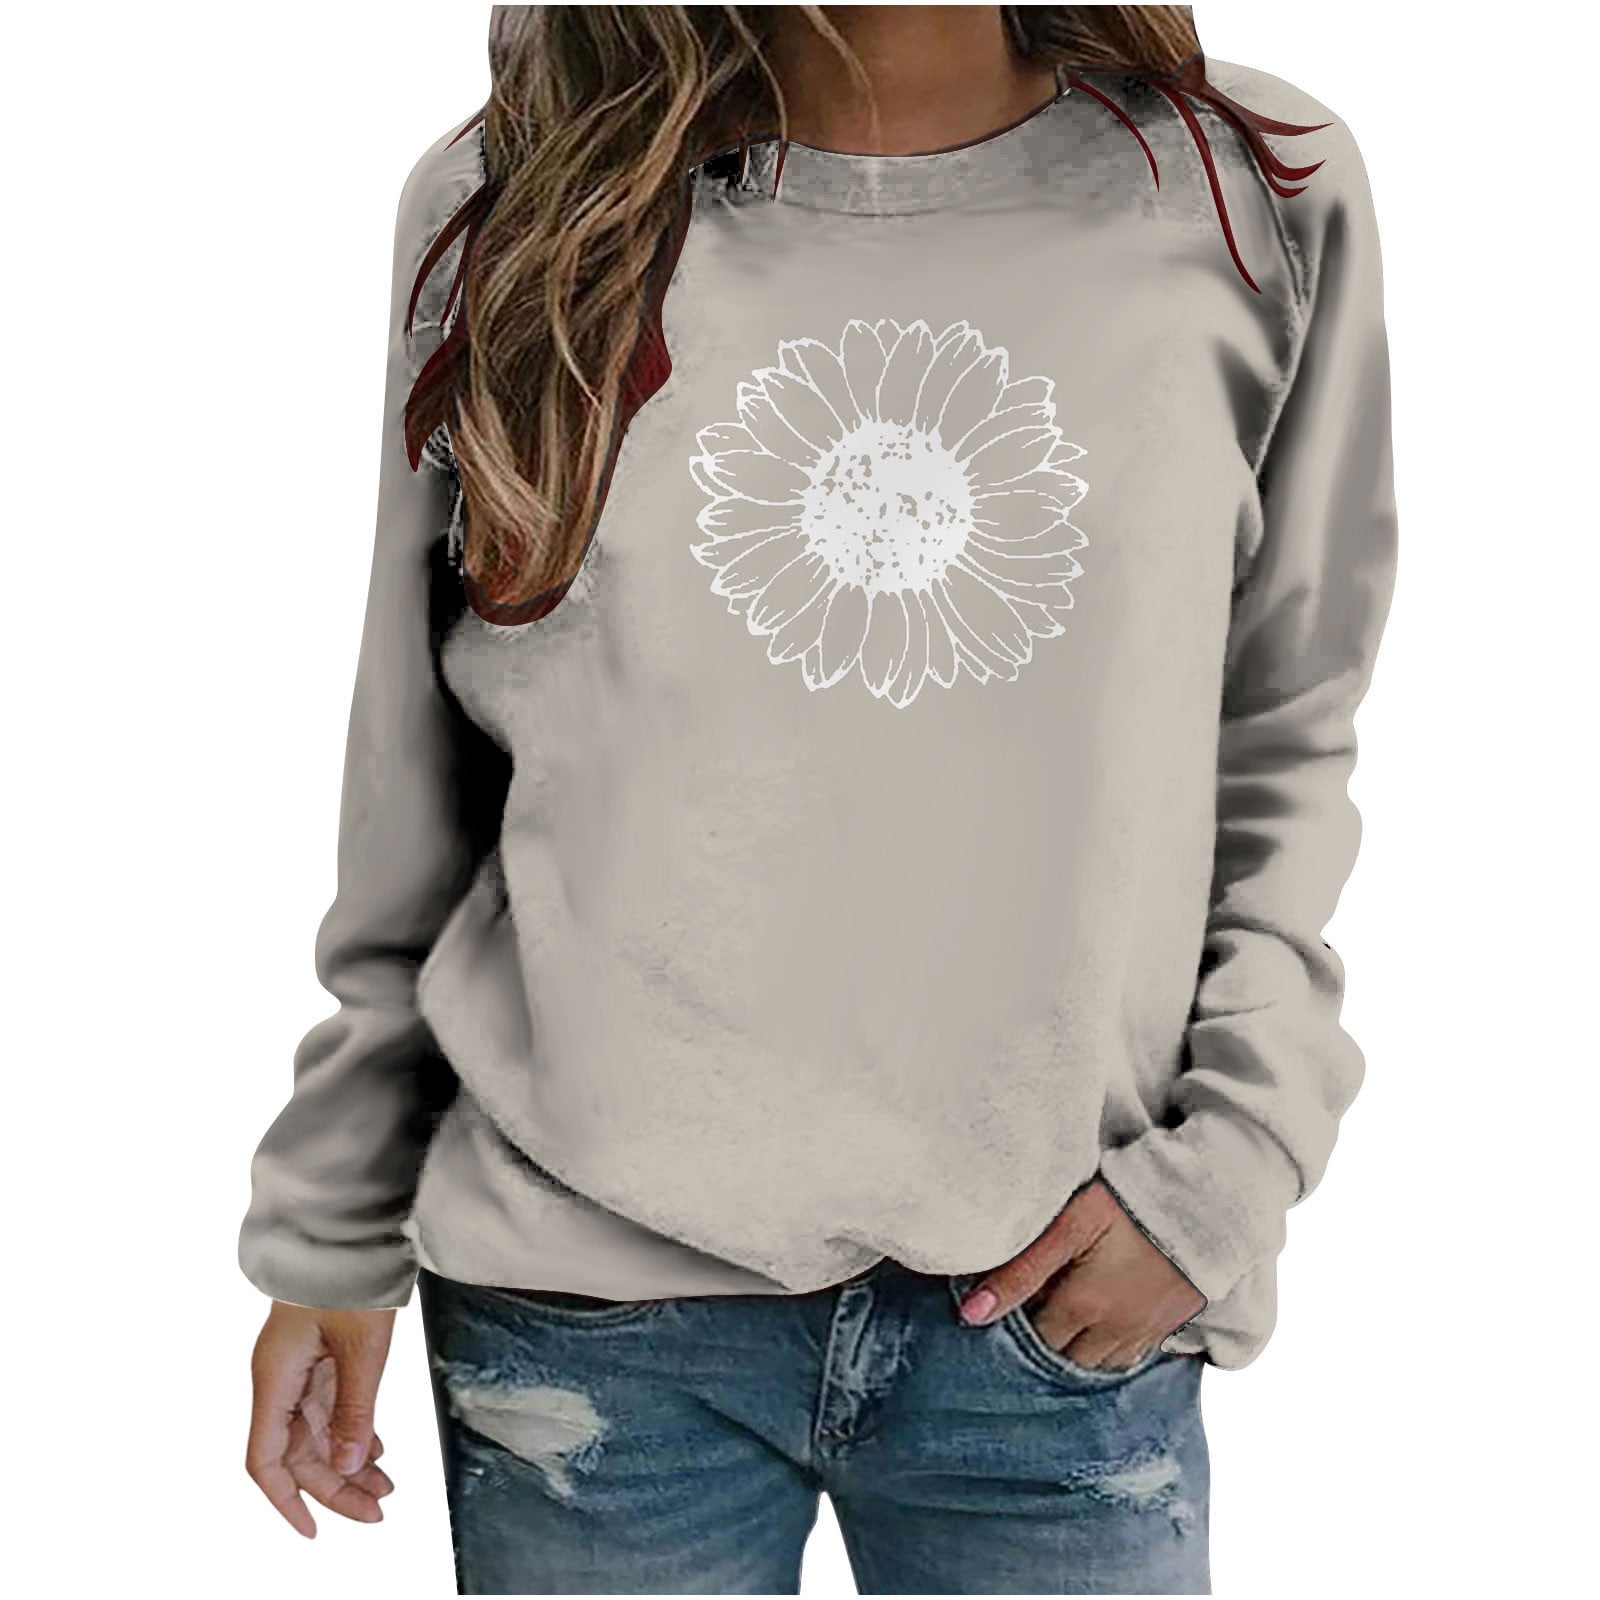 Yyeselk Business Casual Tops for Women Casual Long Sleeves Round Neck Cozy  Blouses Trendy Fleece Lovely Daisy Print Hoodless Sweatshirt Army Green L 